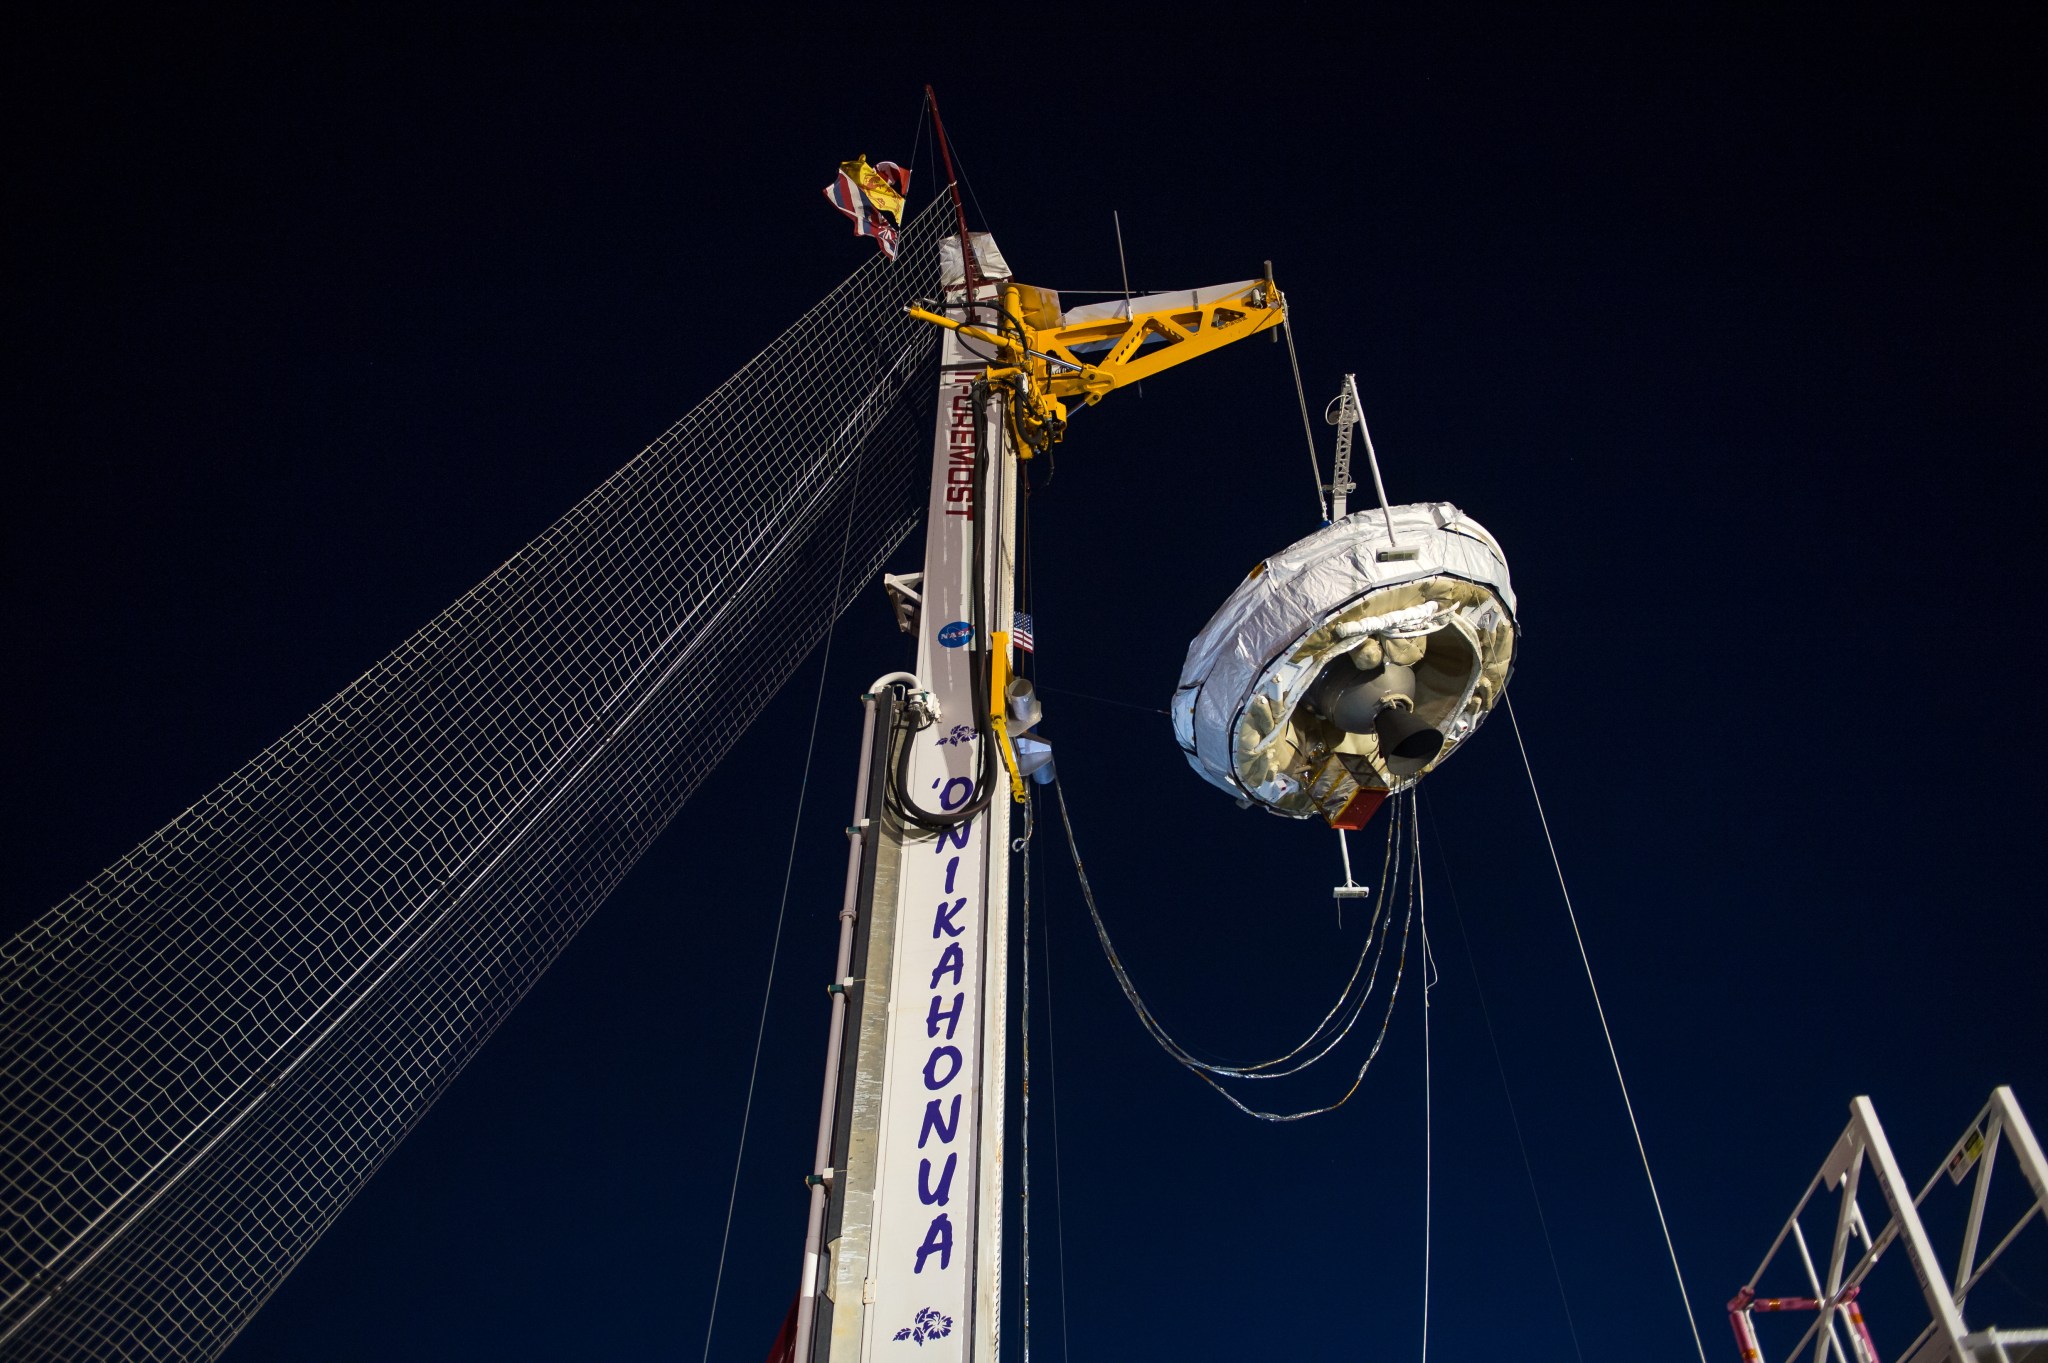 Saucer-shaped supersonic decelerator suspended from rig against night sky